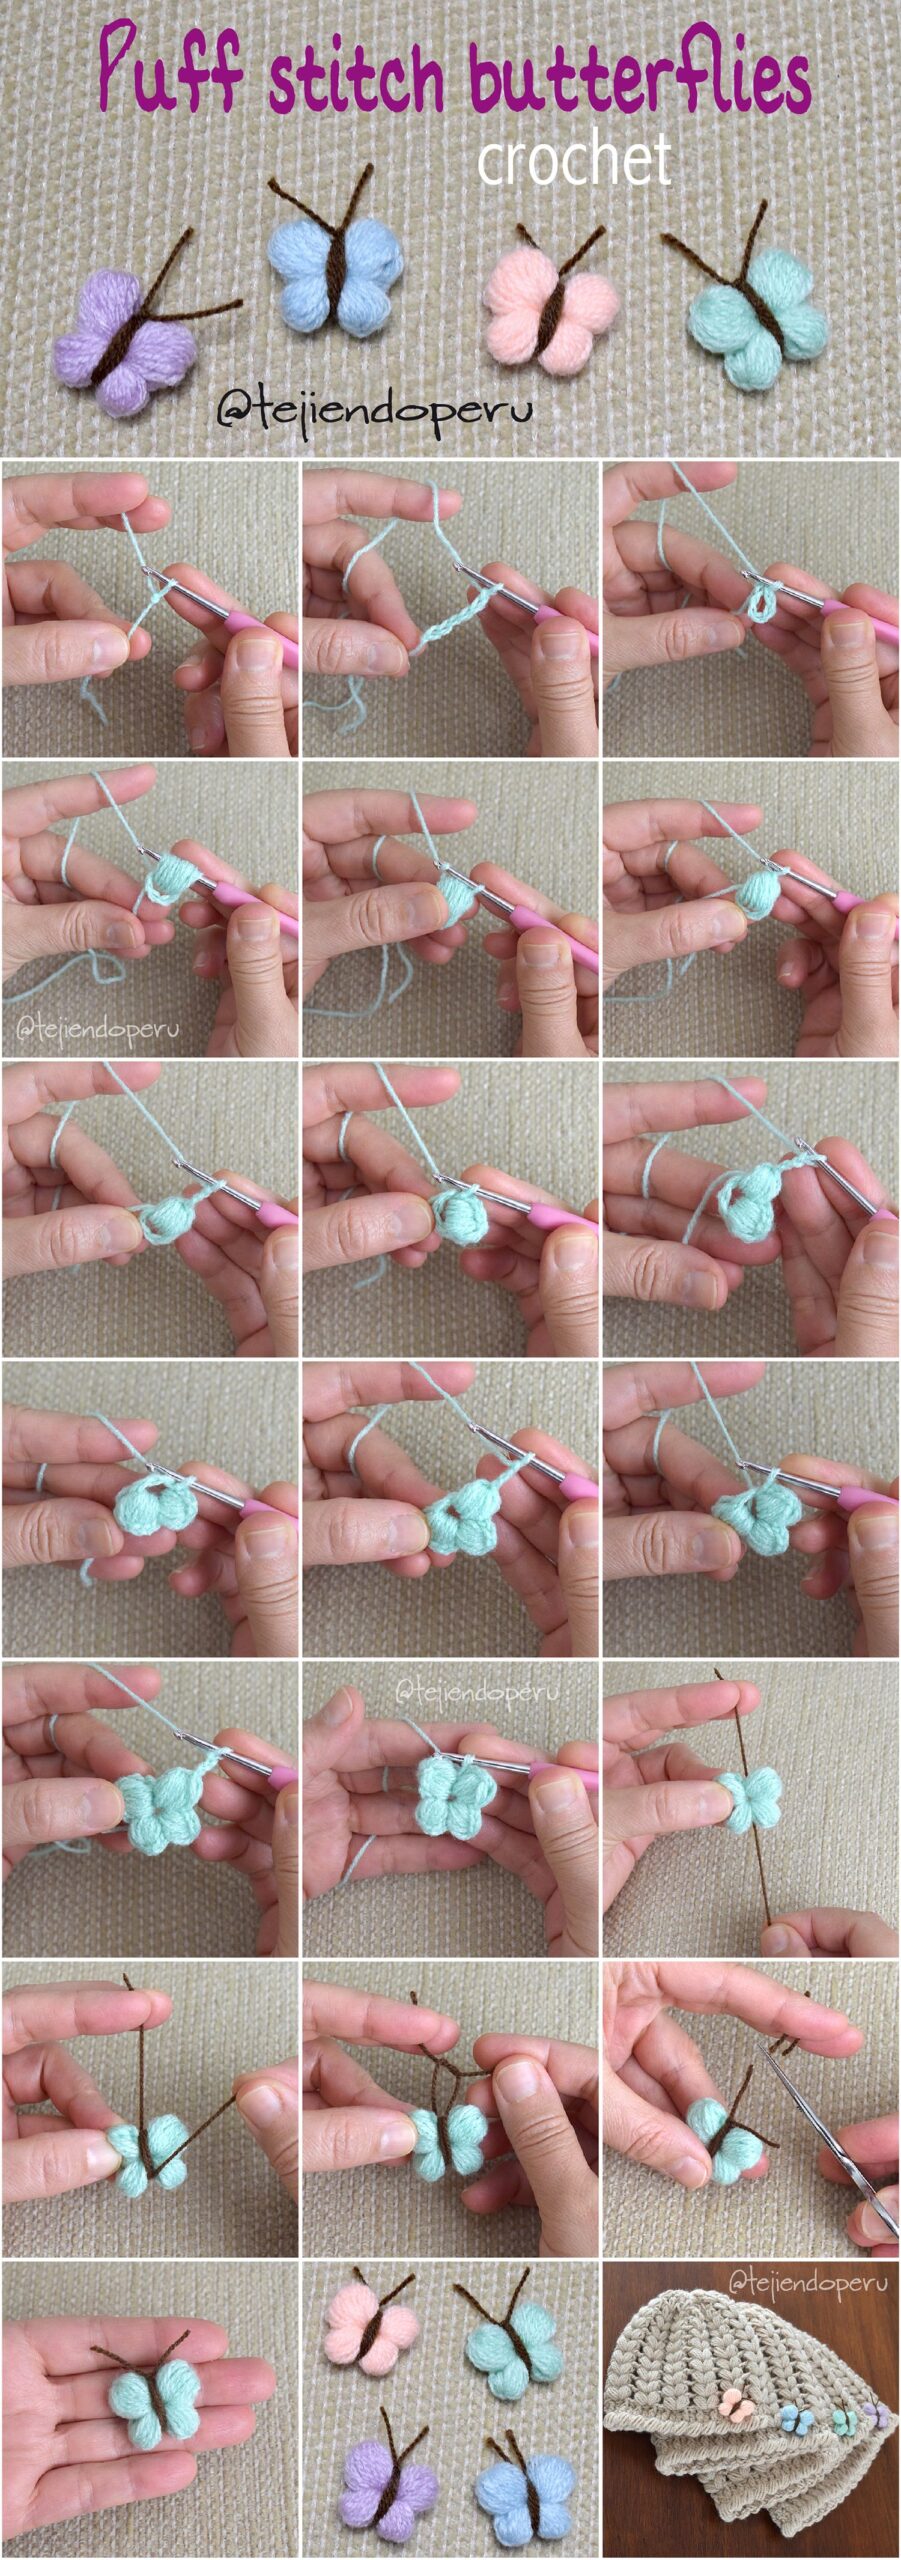 Crochet: puff stitch butterflies! Beautiful and easy :)